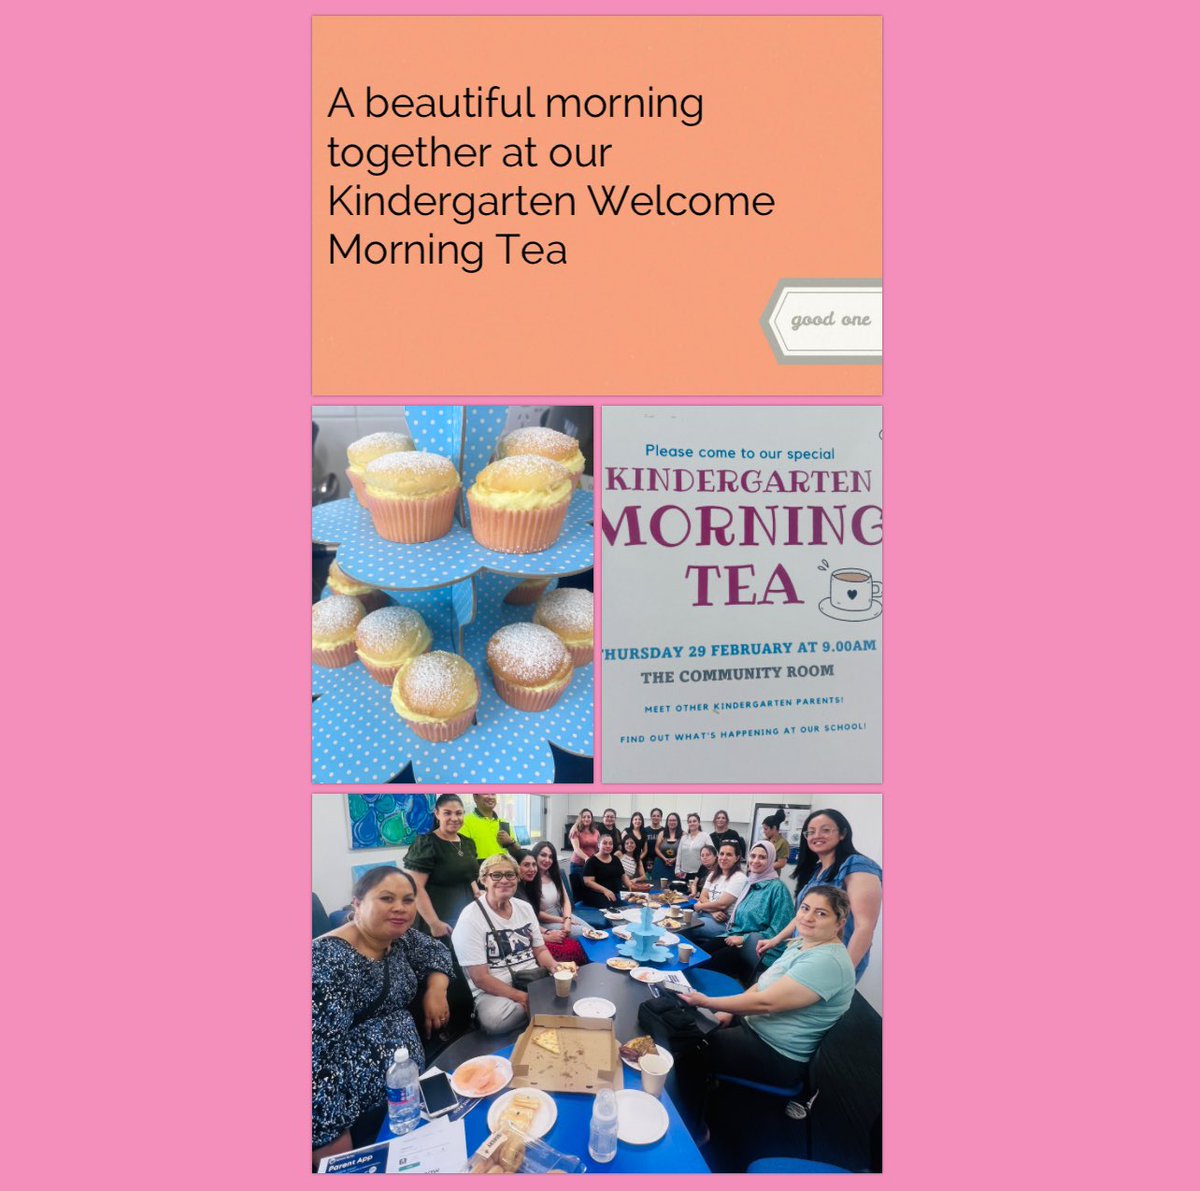 A great morning at our Welcome Morning Tea for new Kindergarten Parents. @fairvaleps @fletcher_cf @AnthonyPitt4